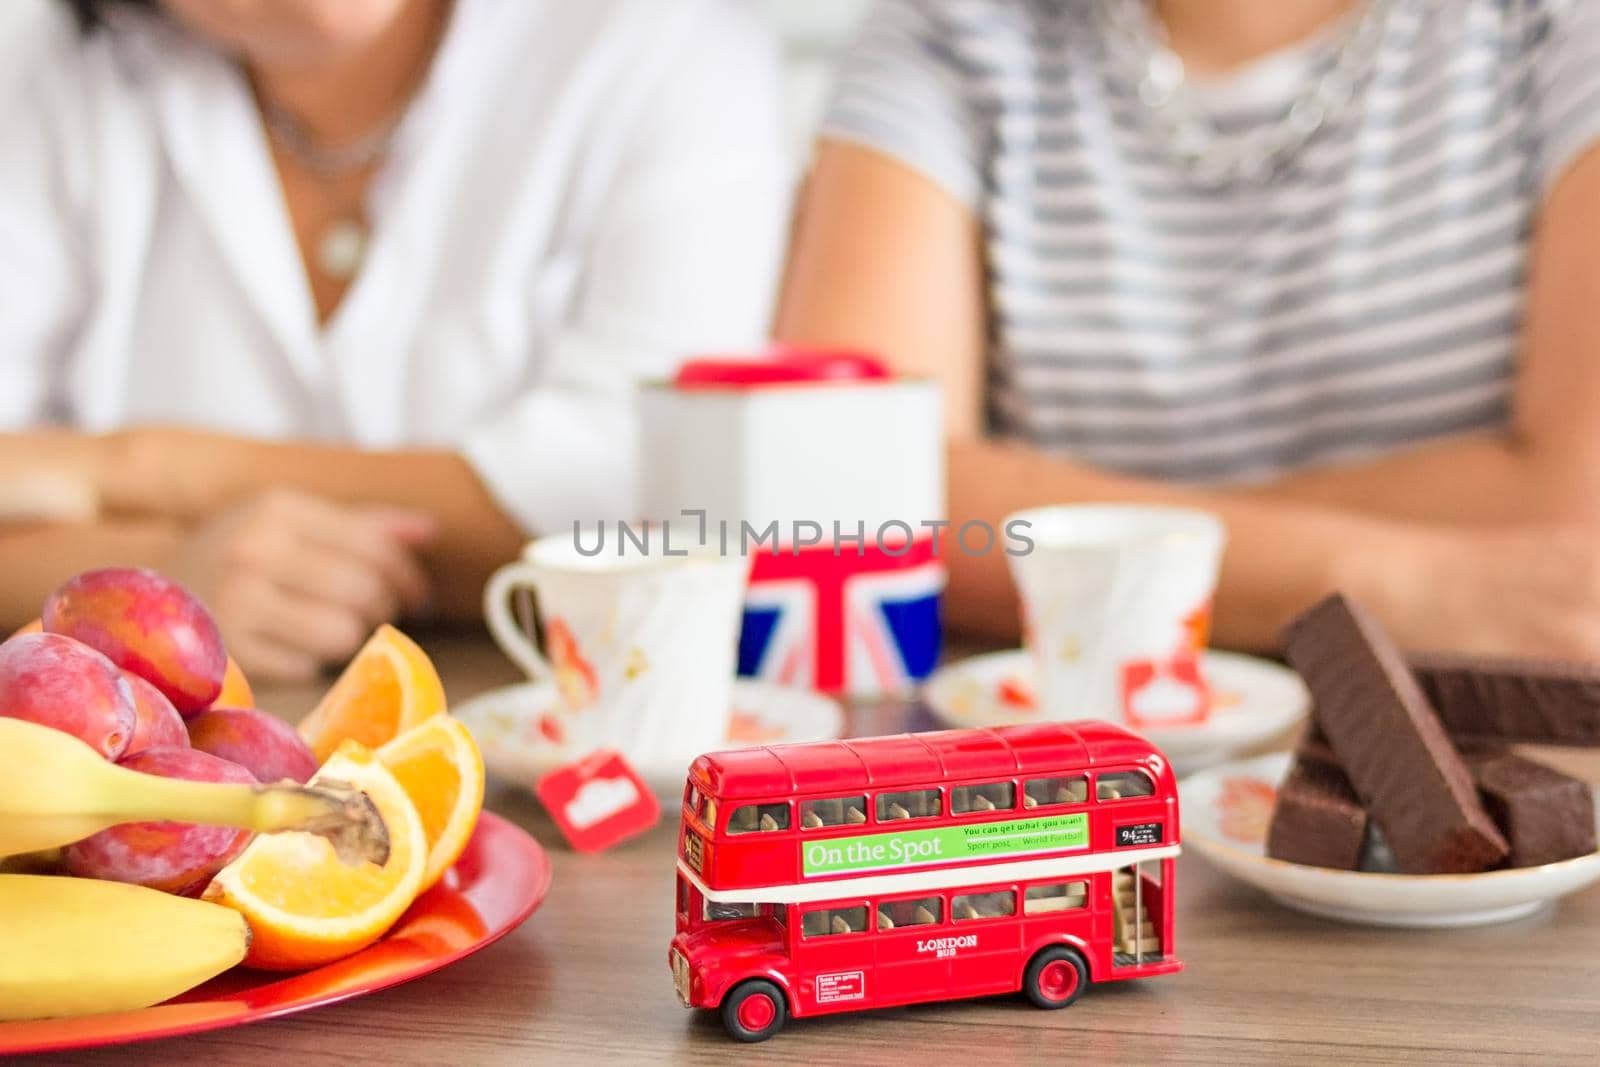 Traditional afternoon tea of british ceremony with such symbol of London as toy double decker bus, defocused faceless women on background, front focus